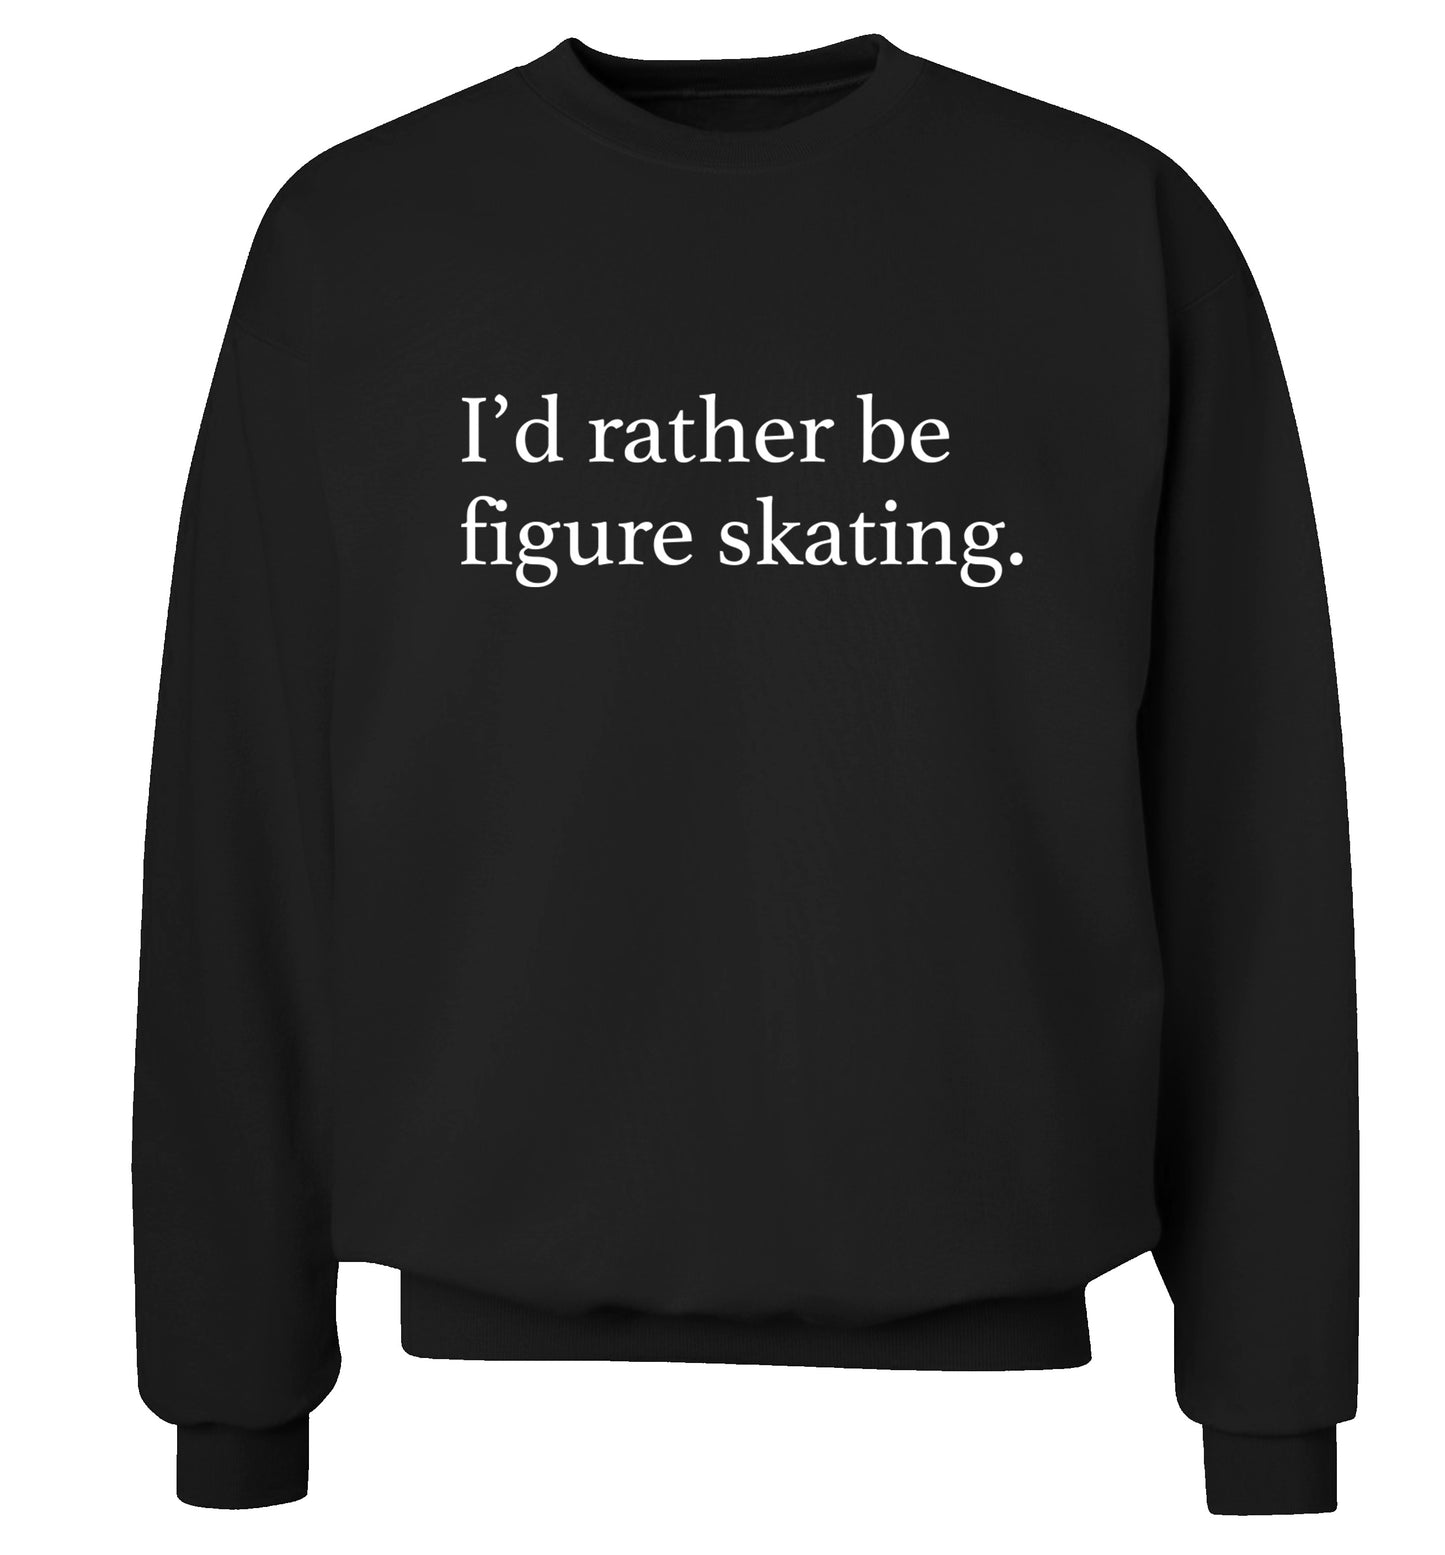 I'd rather be figure skating Adult's unisexblack Sweater 2XL